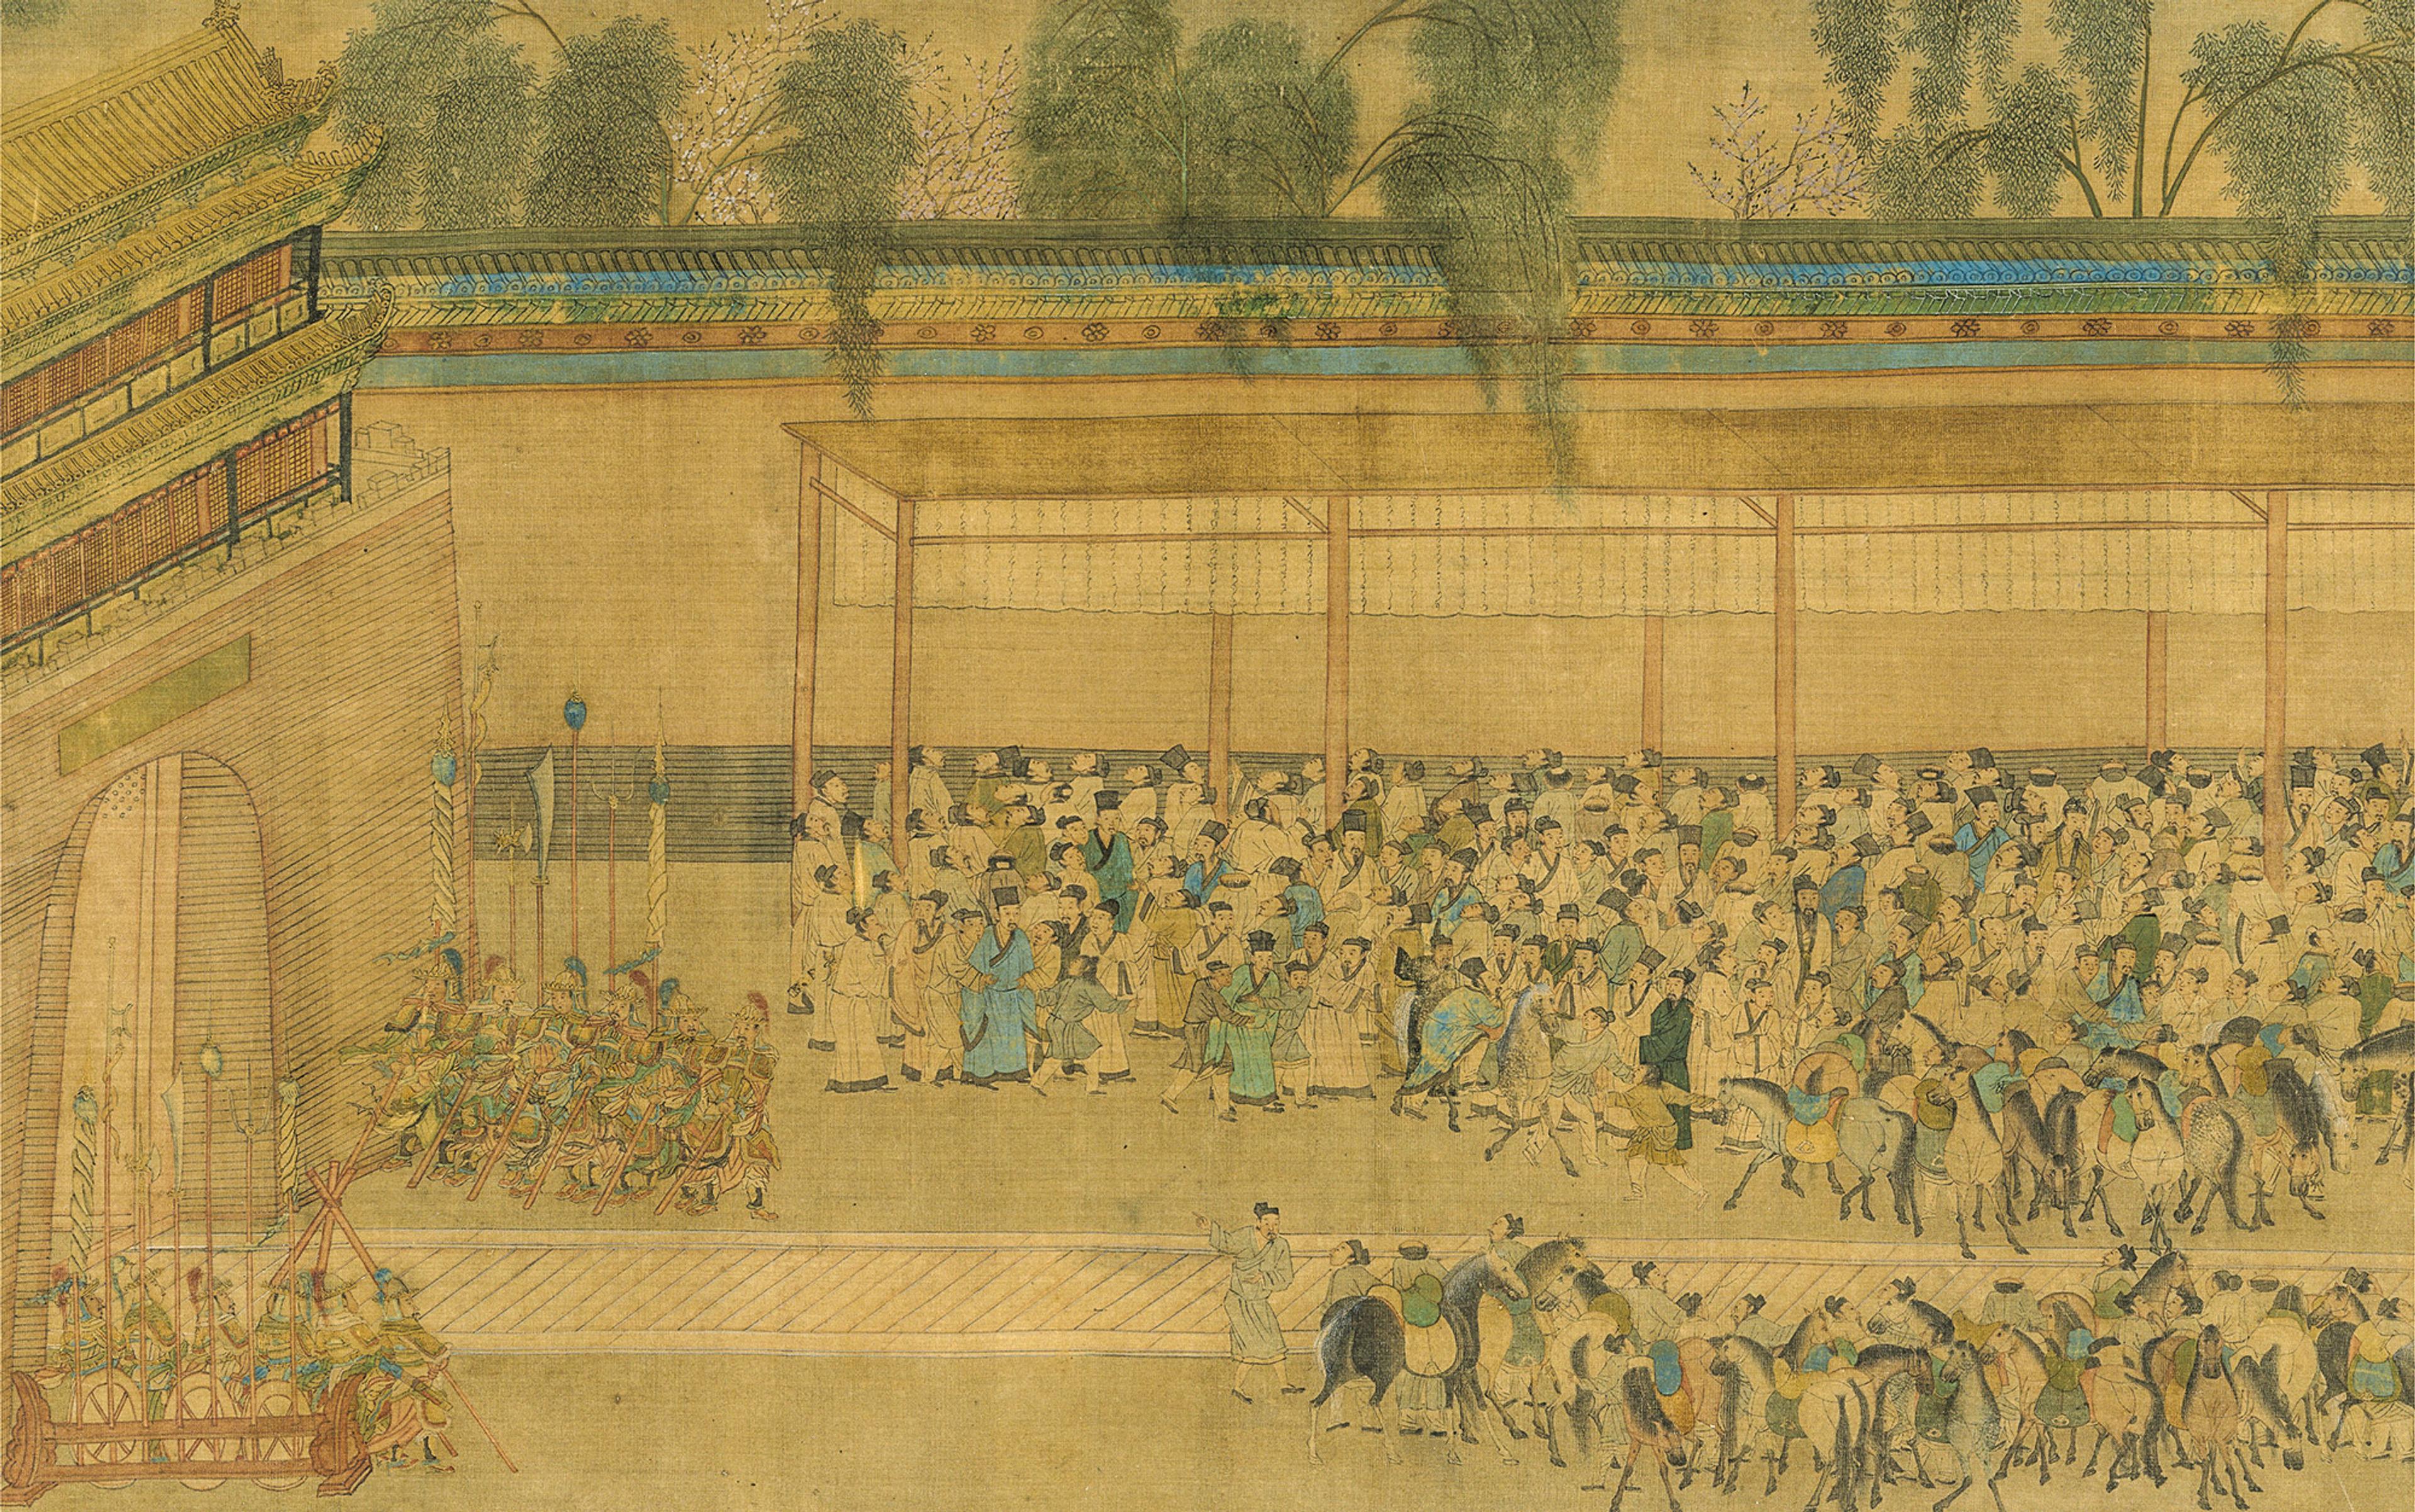 Many figures in traditional dress are gathered beneath a structure from which hang paper lists. In the foreground are horses. The colours are muted with age